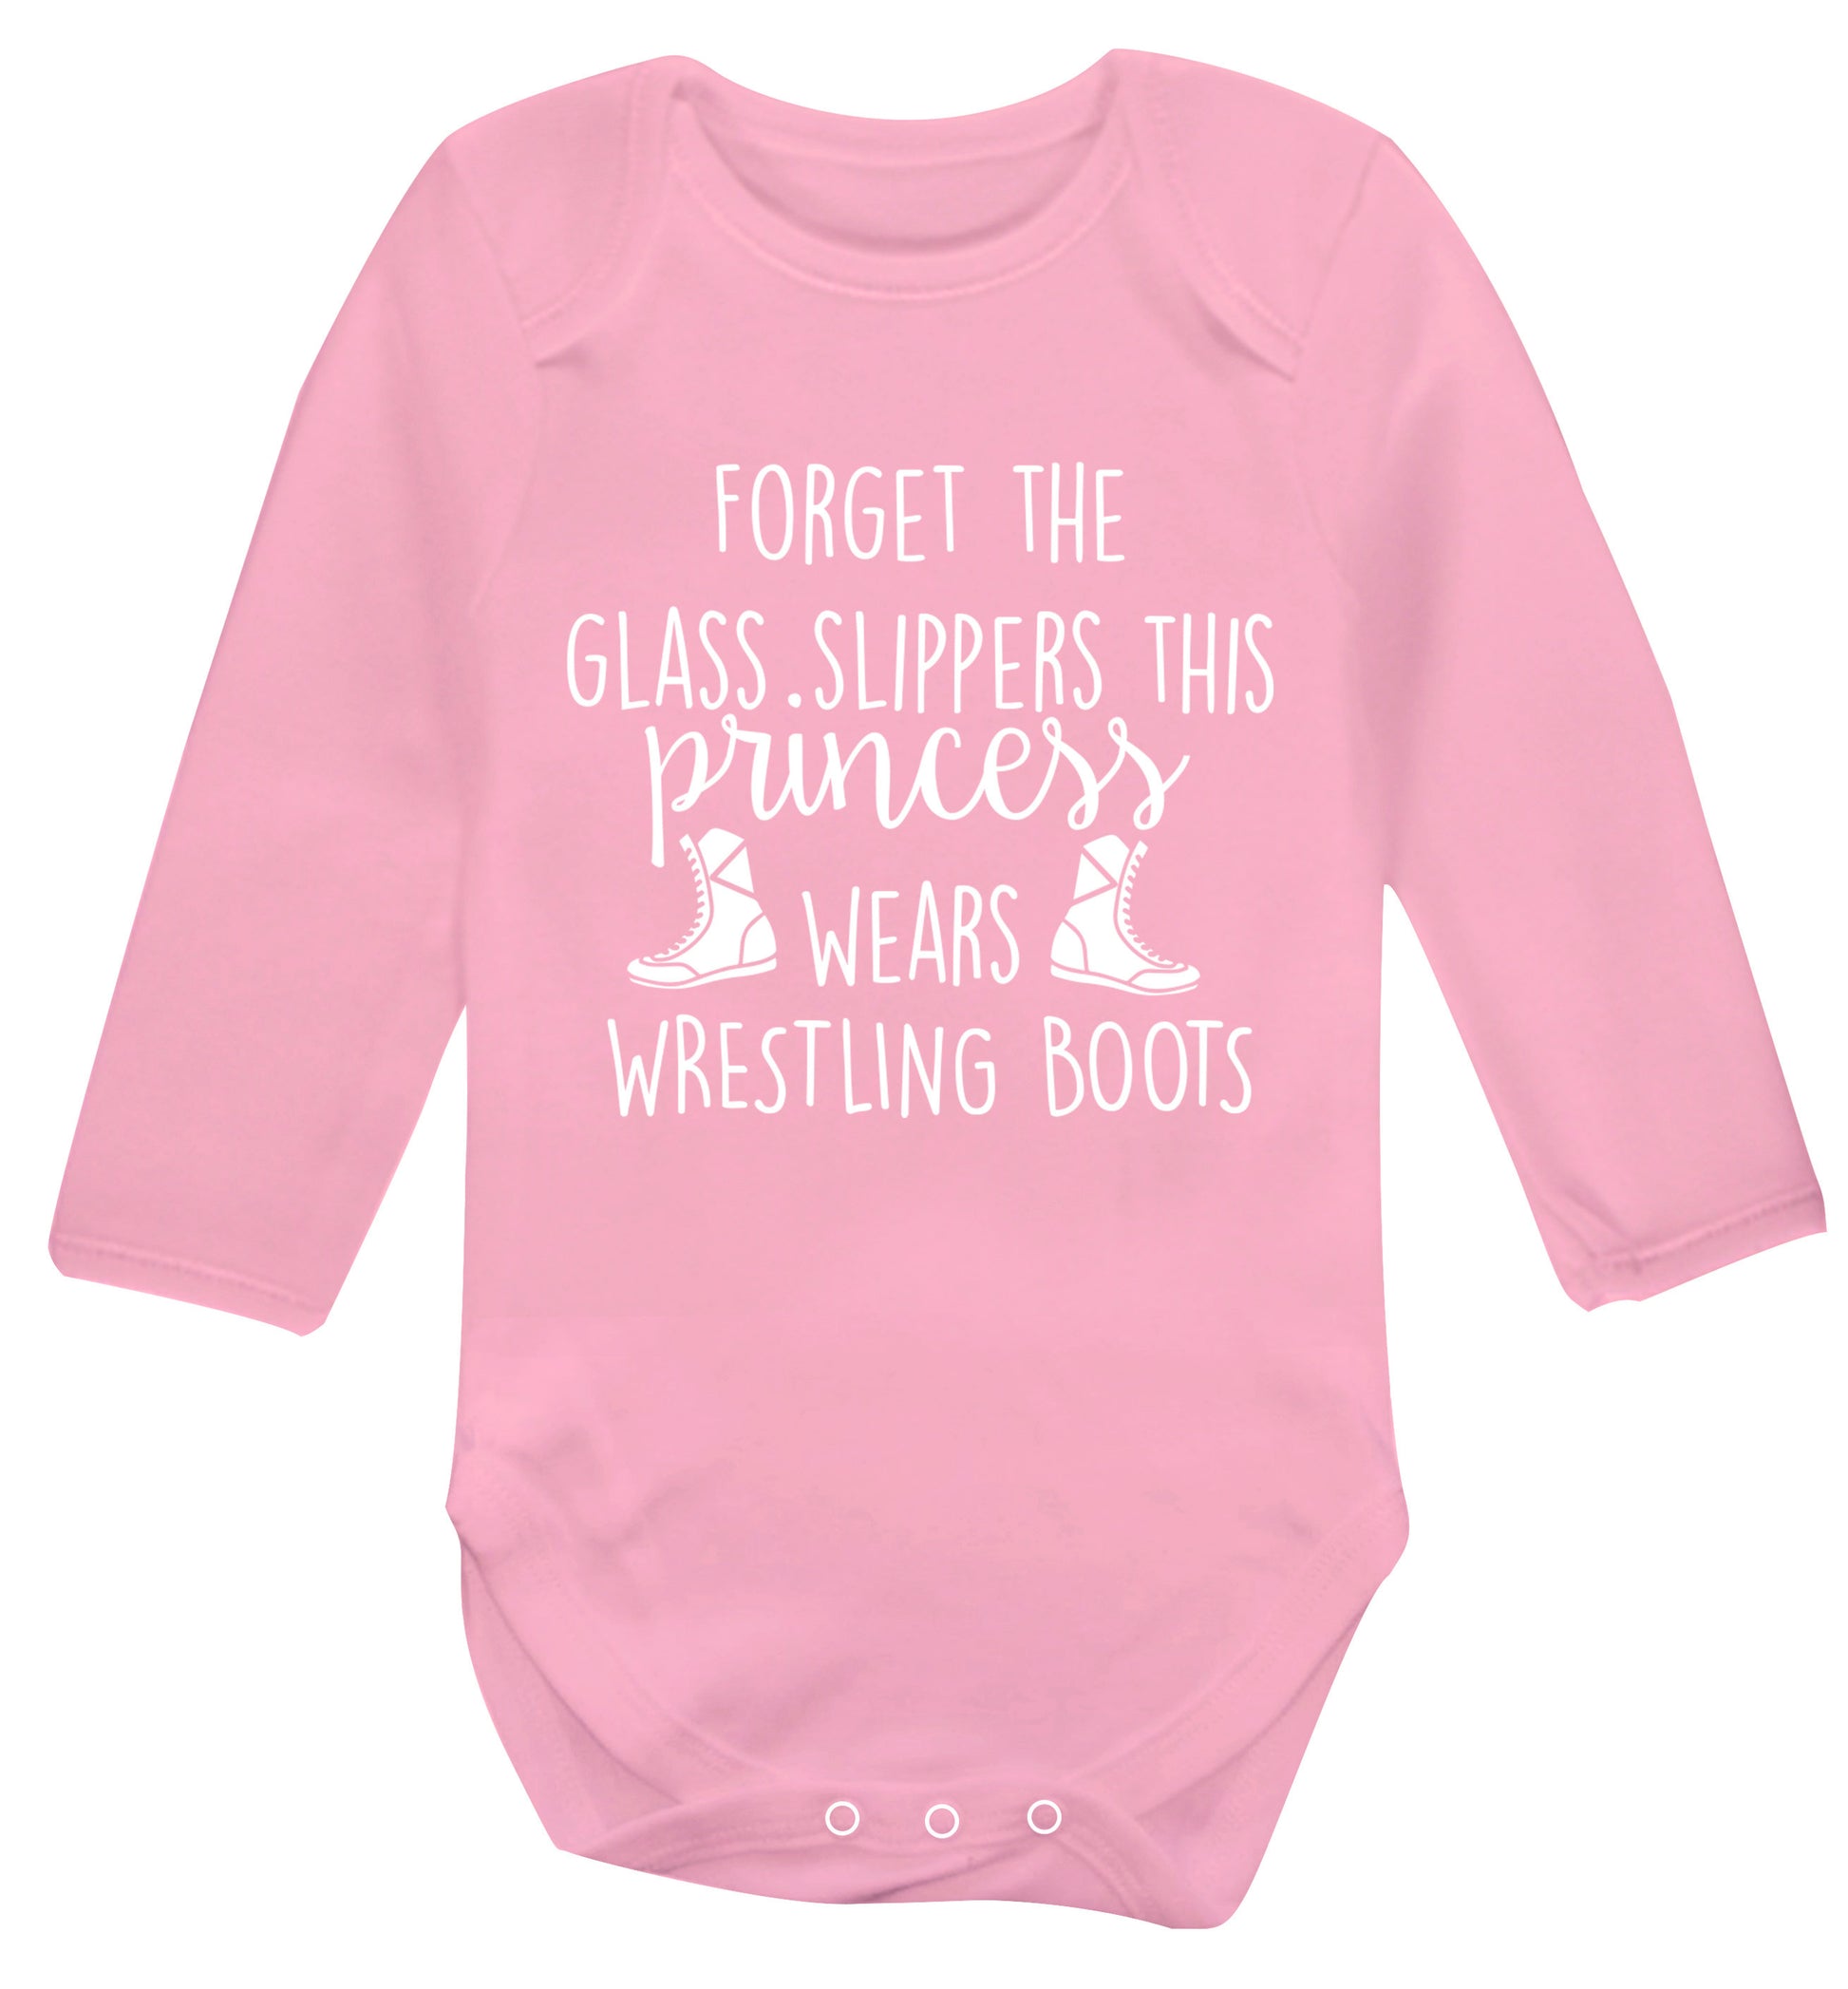 Forget the glass slippers this princess wears wrestling boots Baby Vest long sleeved pale pink 6-12 months